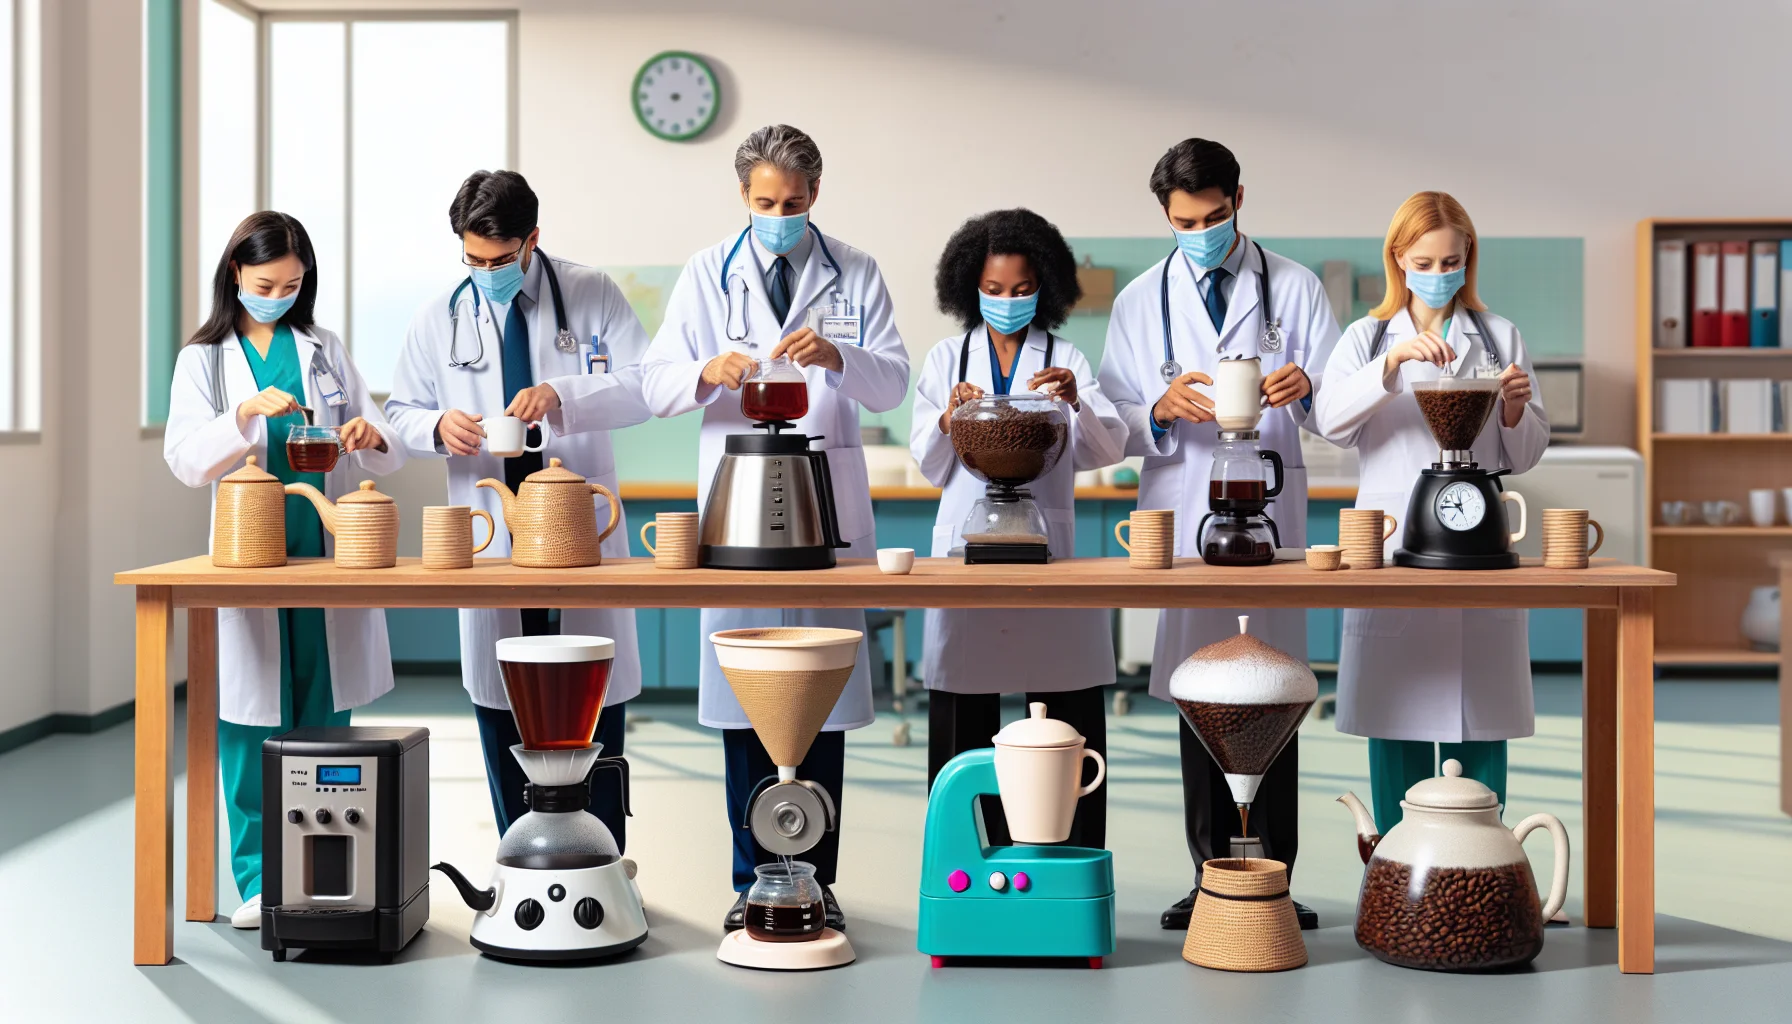 Generate a realistic image that depicts a lighthearted scenario about maintaining balance in Medical life by demonstrating brewing of tea and coffee. The scene should include medical professionals of diverse gender and descents in their work environment, each with their own tea and coffee brewing equipment. Include different varieties of tea and coffee products, and infuse some humor into it, maybe by accentuating the enthusiasm of these medical professionals for their chosen beverage, or by highlighting their quirky, individualized brewing methods.